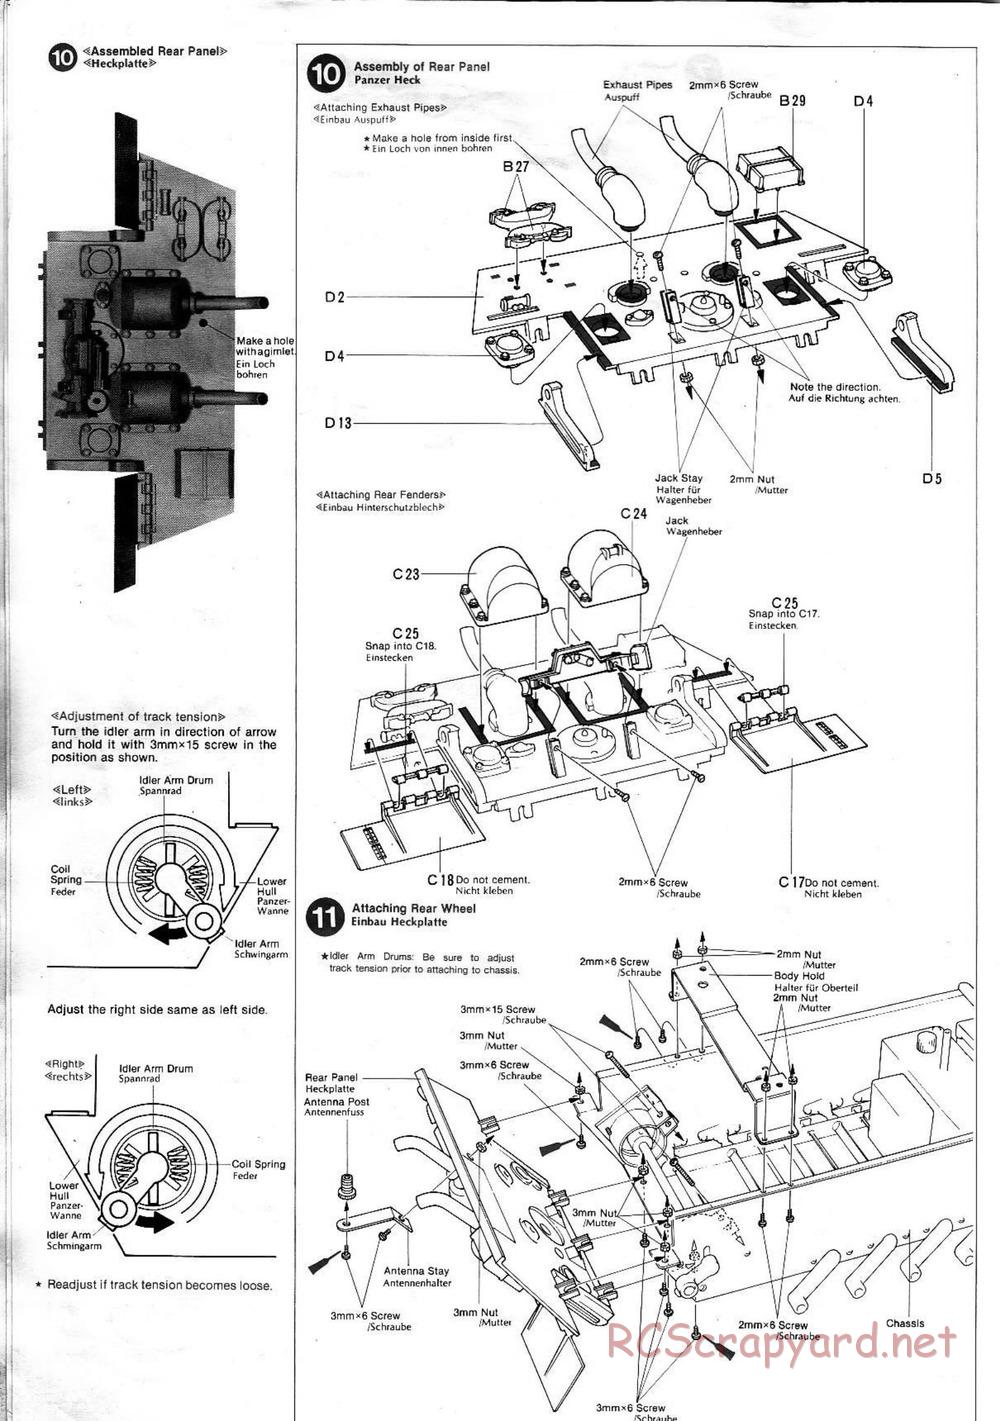 Tamiya - King Tiger (Production Turret) - 1/16 Scale Chassis - Manual - Page 6